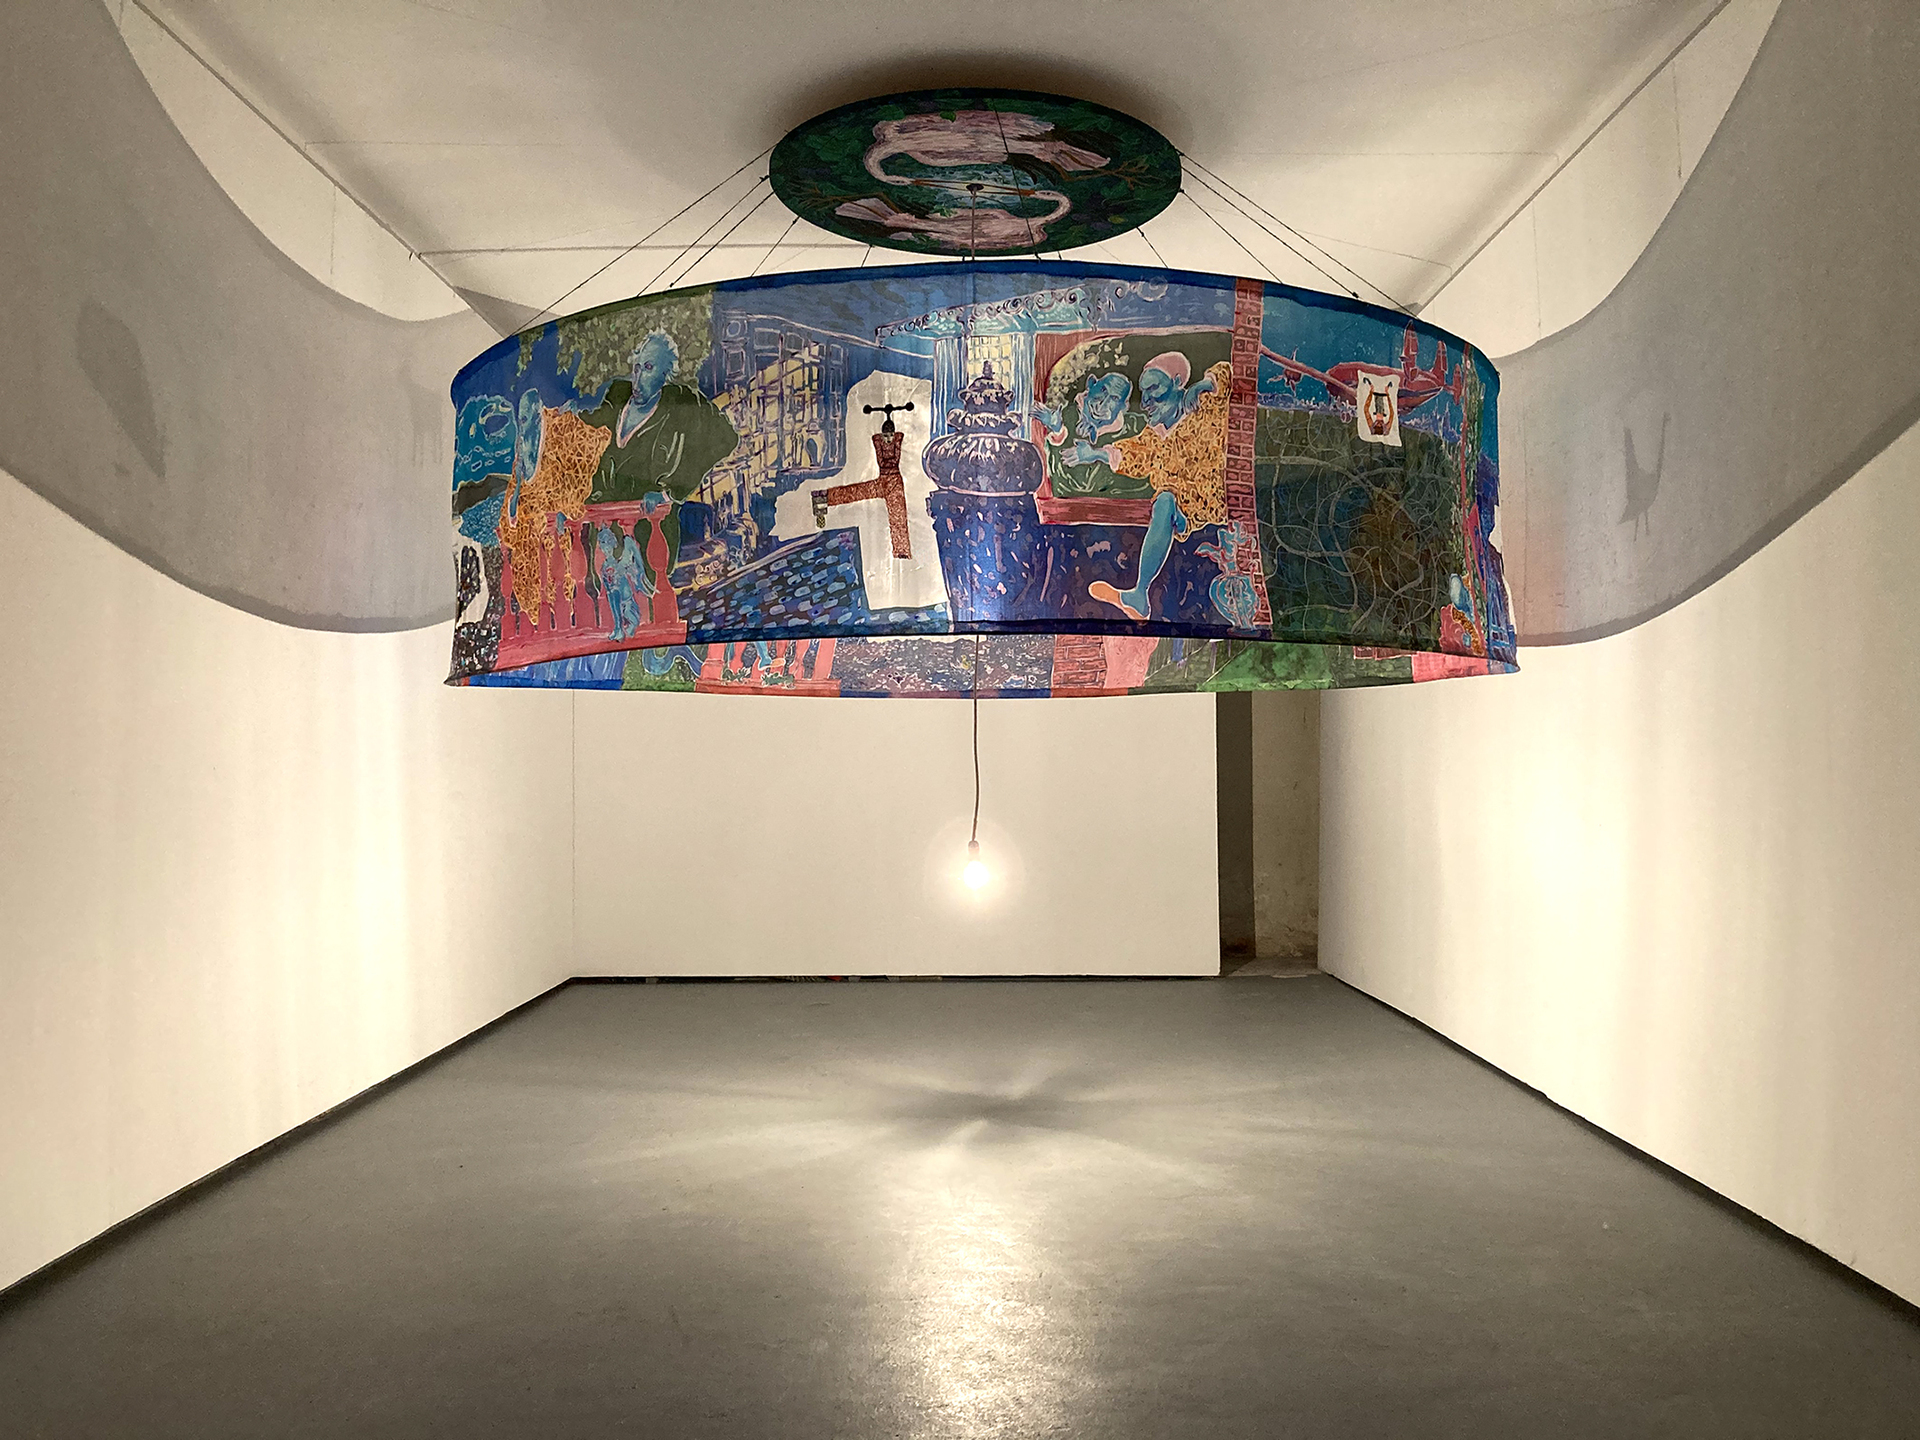 Four feet in the morning, two feet at noon, three feet at night, 2021, painted silk, acrylic on wood, cotton thread embroidery, steel, woven cable, twine, safety pins, light bulb, 242cm x 242cm x 215cm